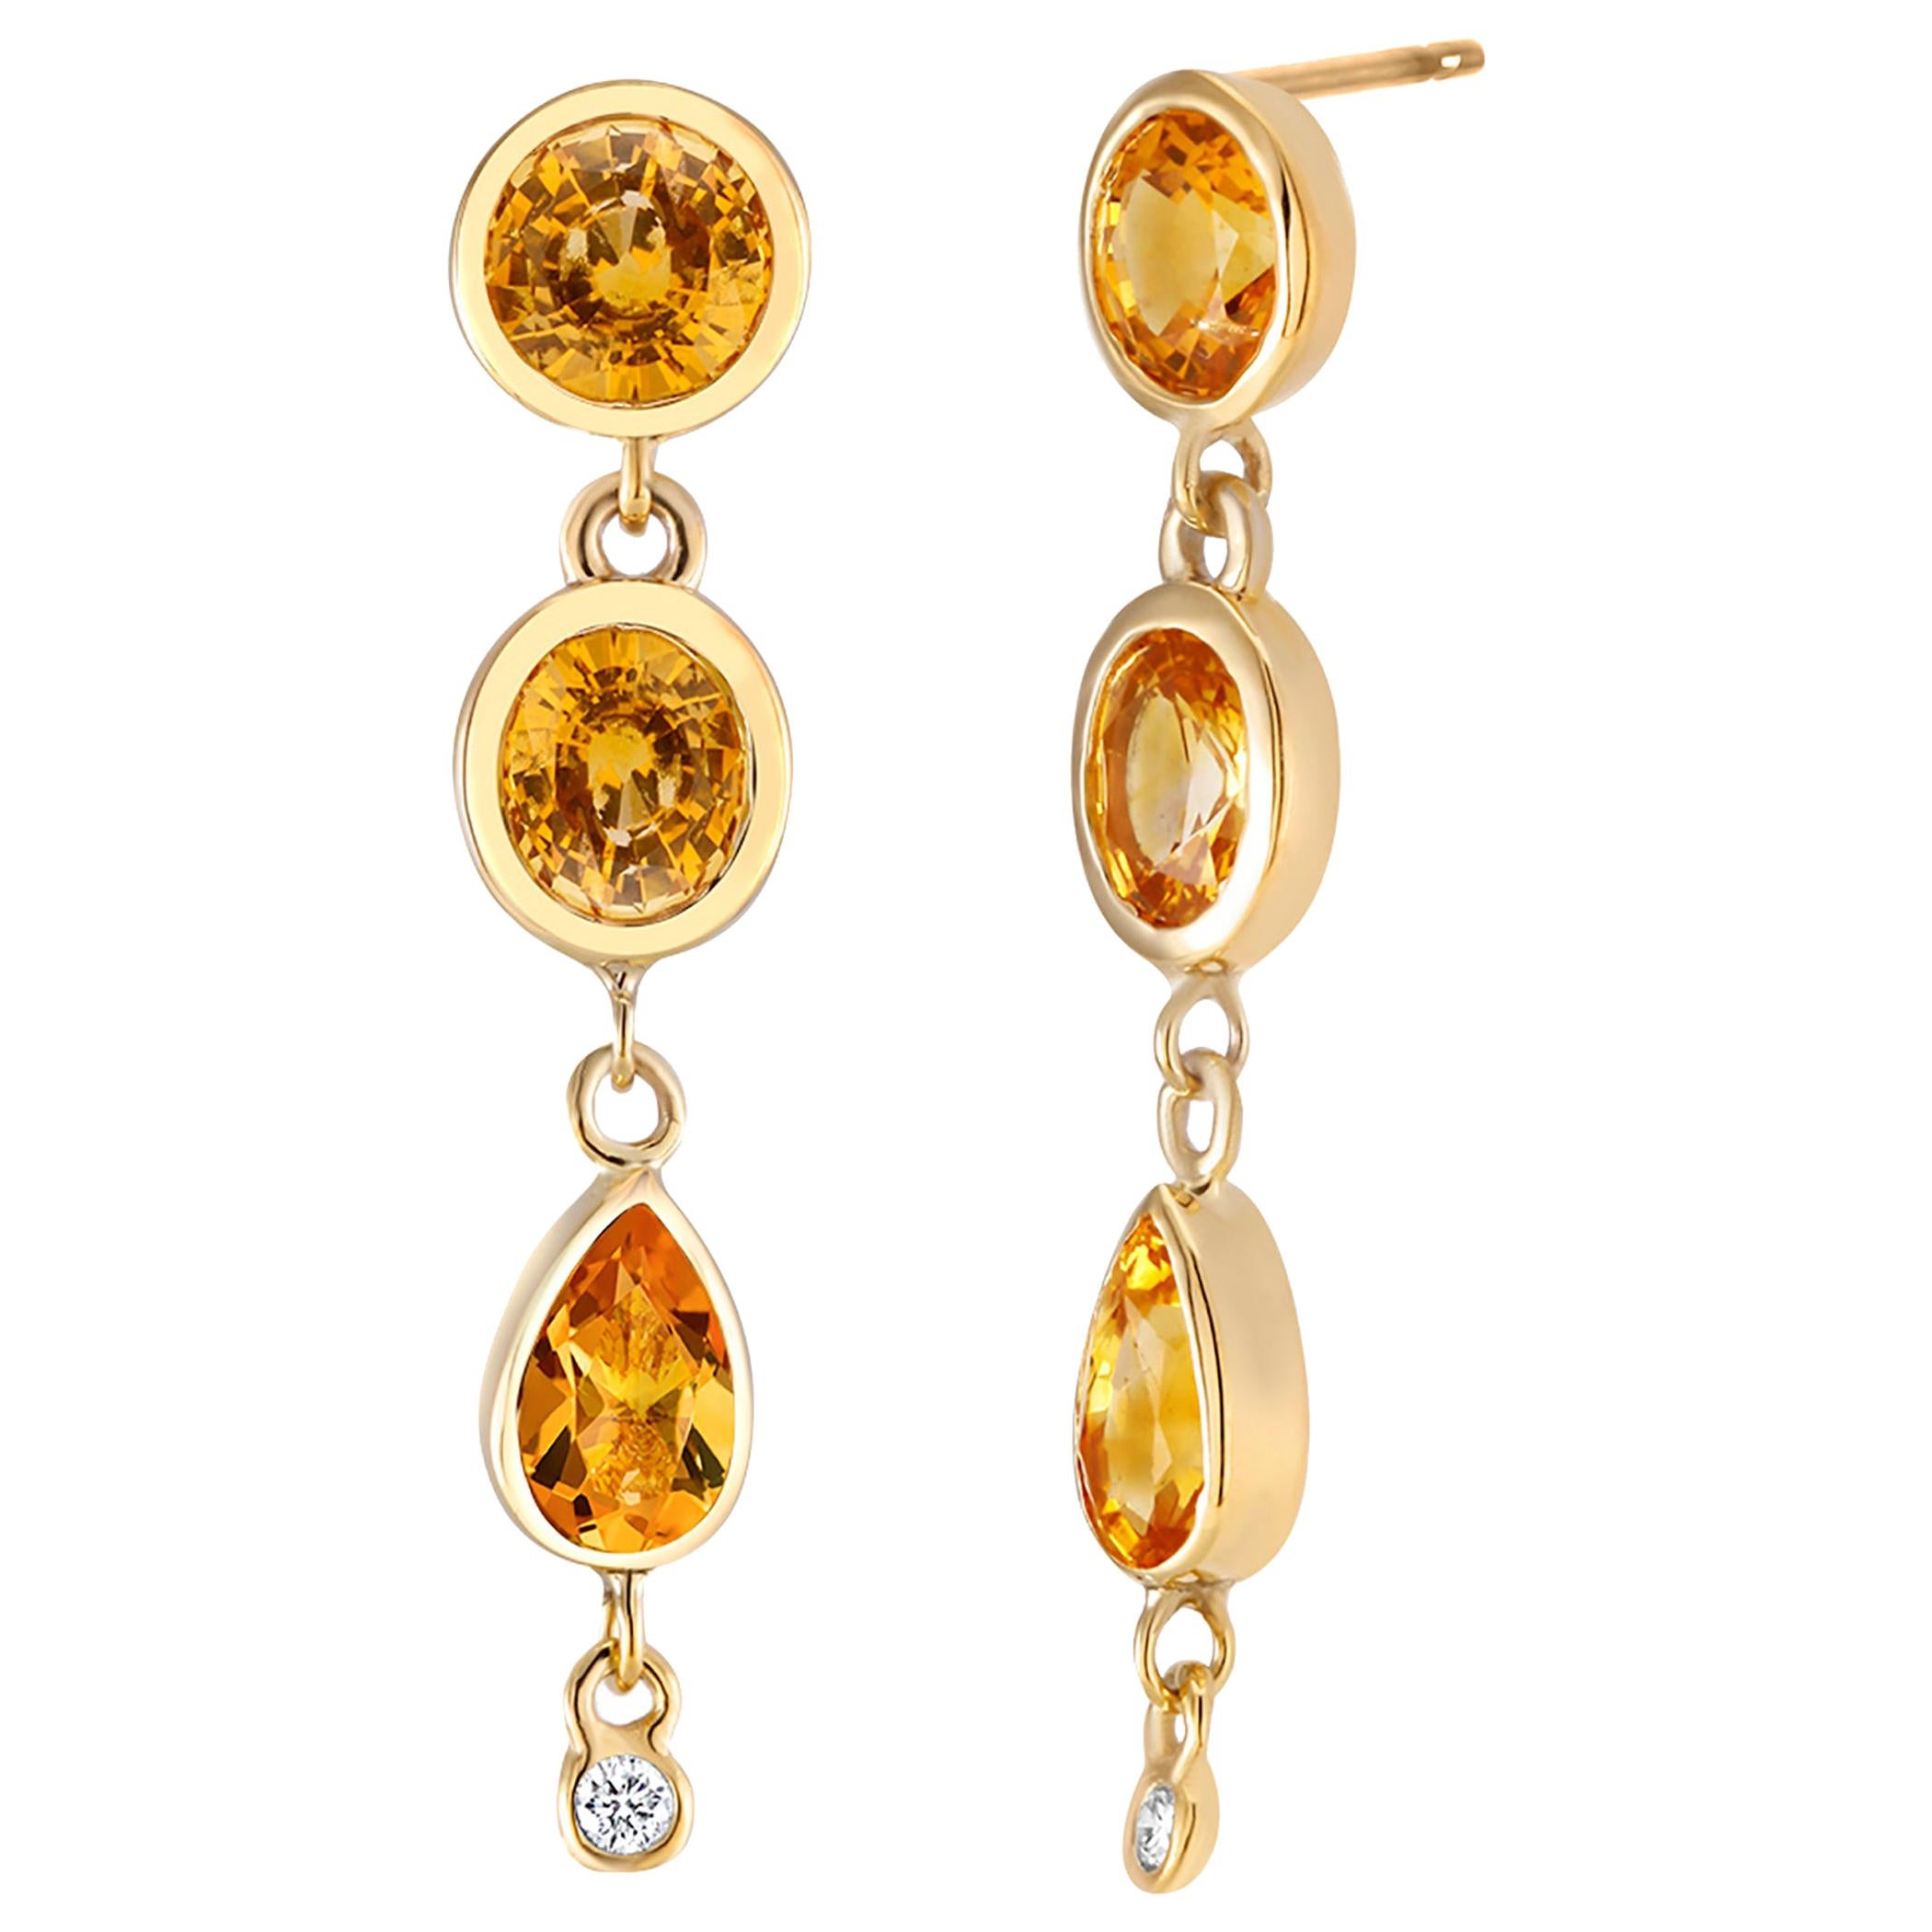 Diamond and Yellow Sapphire Gold Drop Earrings Weighing 6.33 Carat